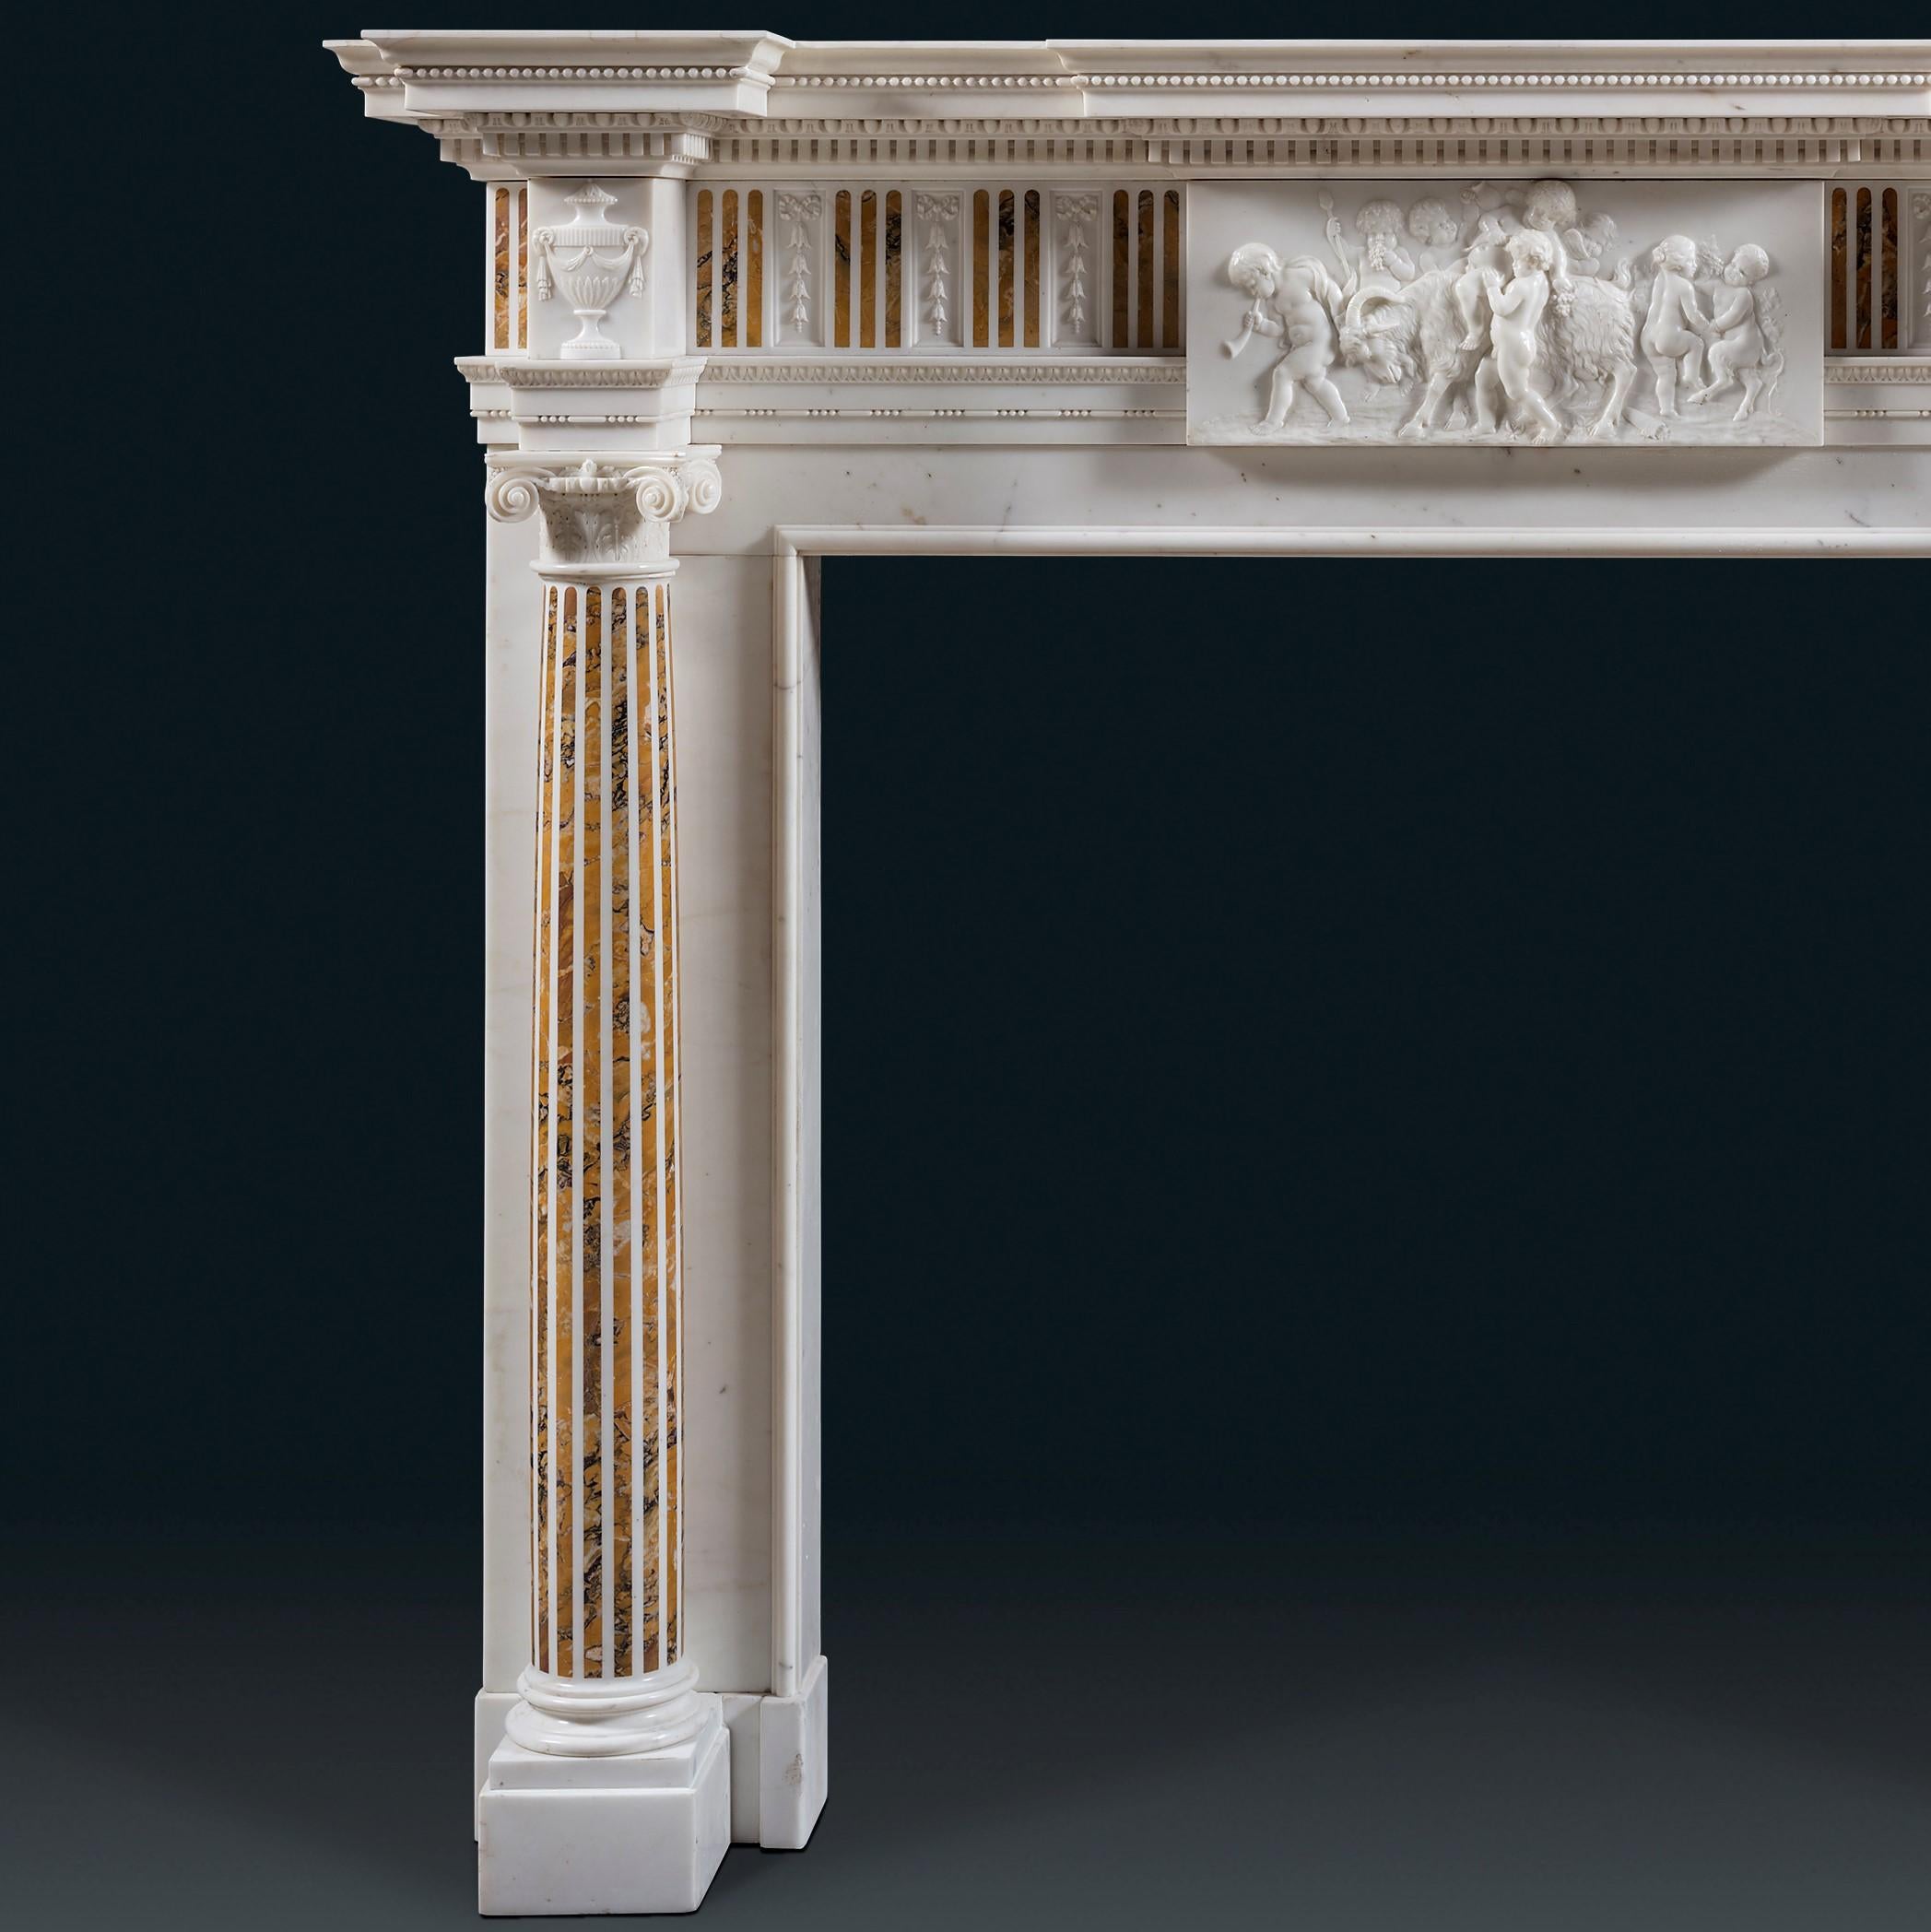 A late 18th century style chimneypiece in Statuary and Siena marbles of truly exceptional quality. The moulded shelf, carved with dentils and Egg & Dart, breaks forward above the central tablet and square corner blocks. The tablet depicts a scene of